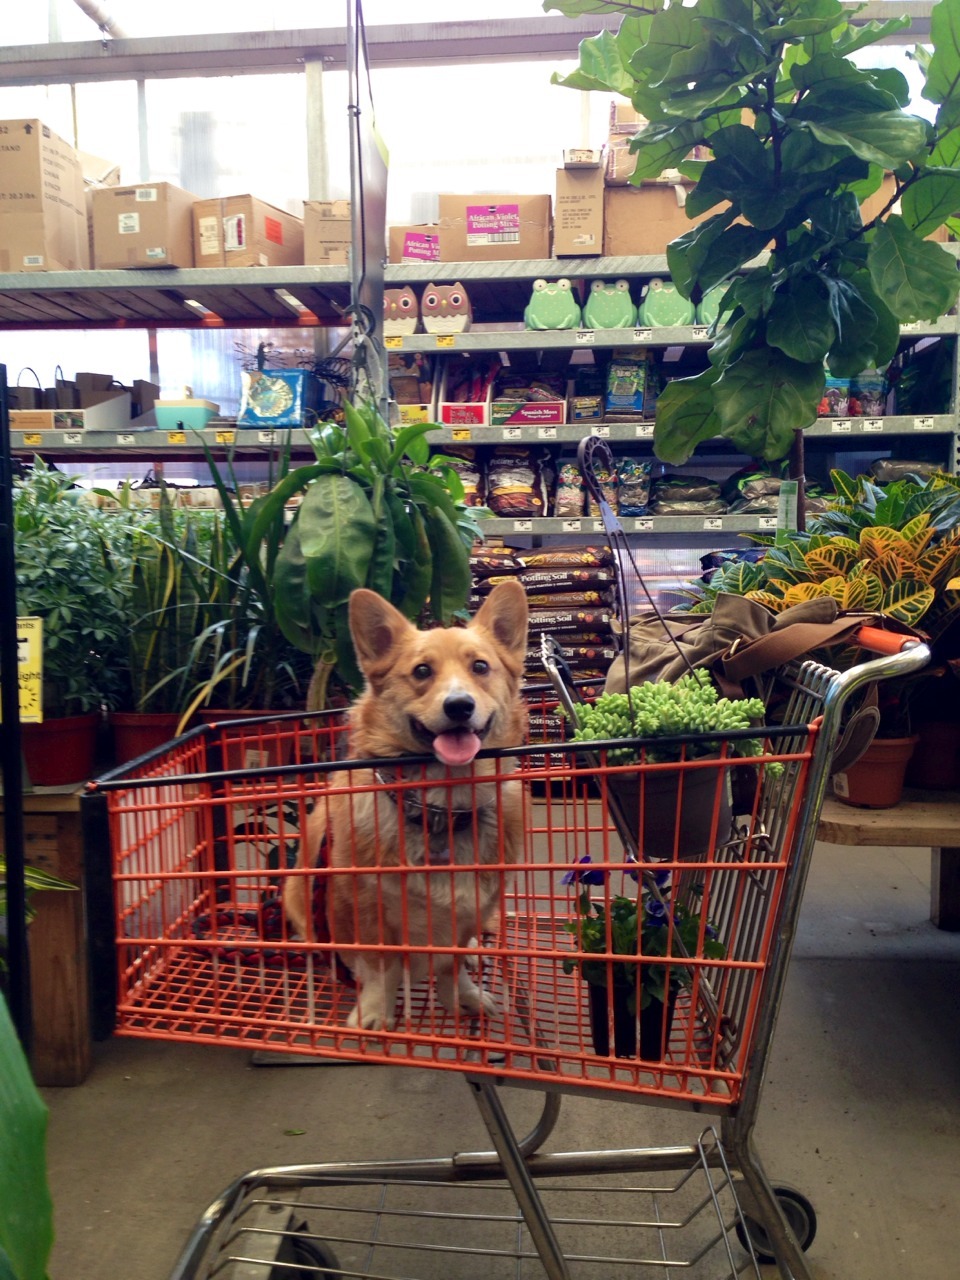 templetonthecorgi:  The idea is to put Templeton in the cart so I won’t buy so